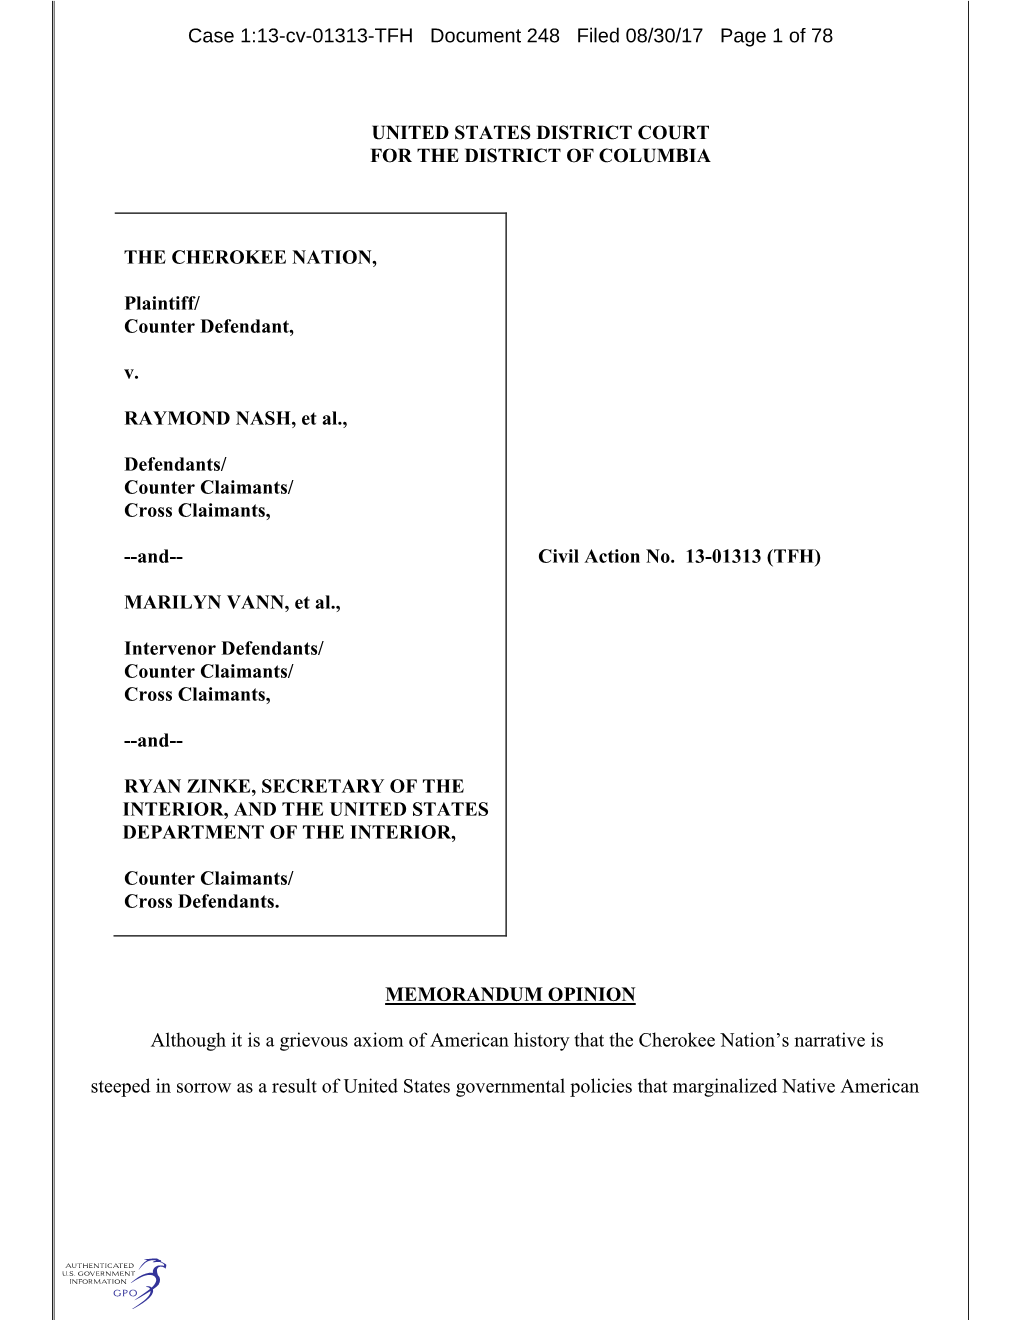 UNITED STATES DISTRICT COURT for the DISTRICT of COLUMBIA the CHEROKEE NATION, Plaintiff